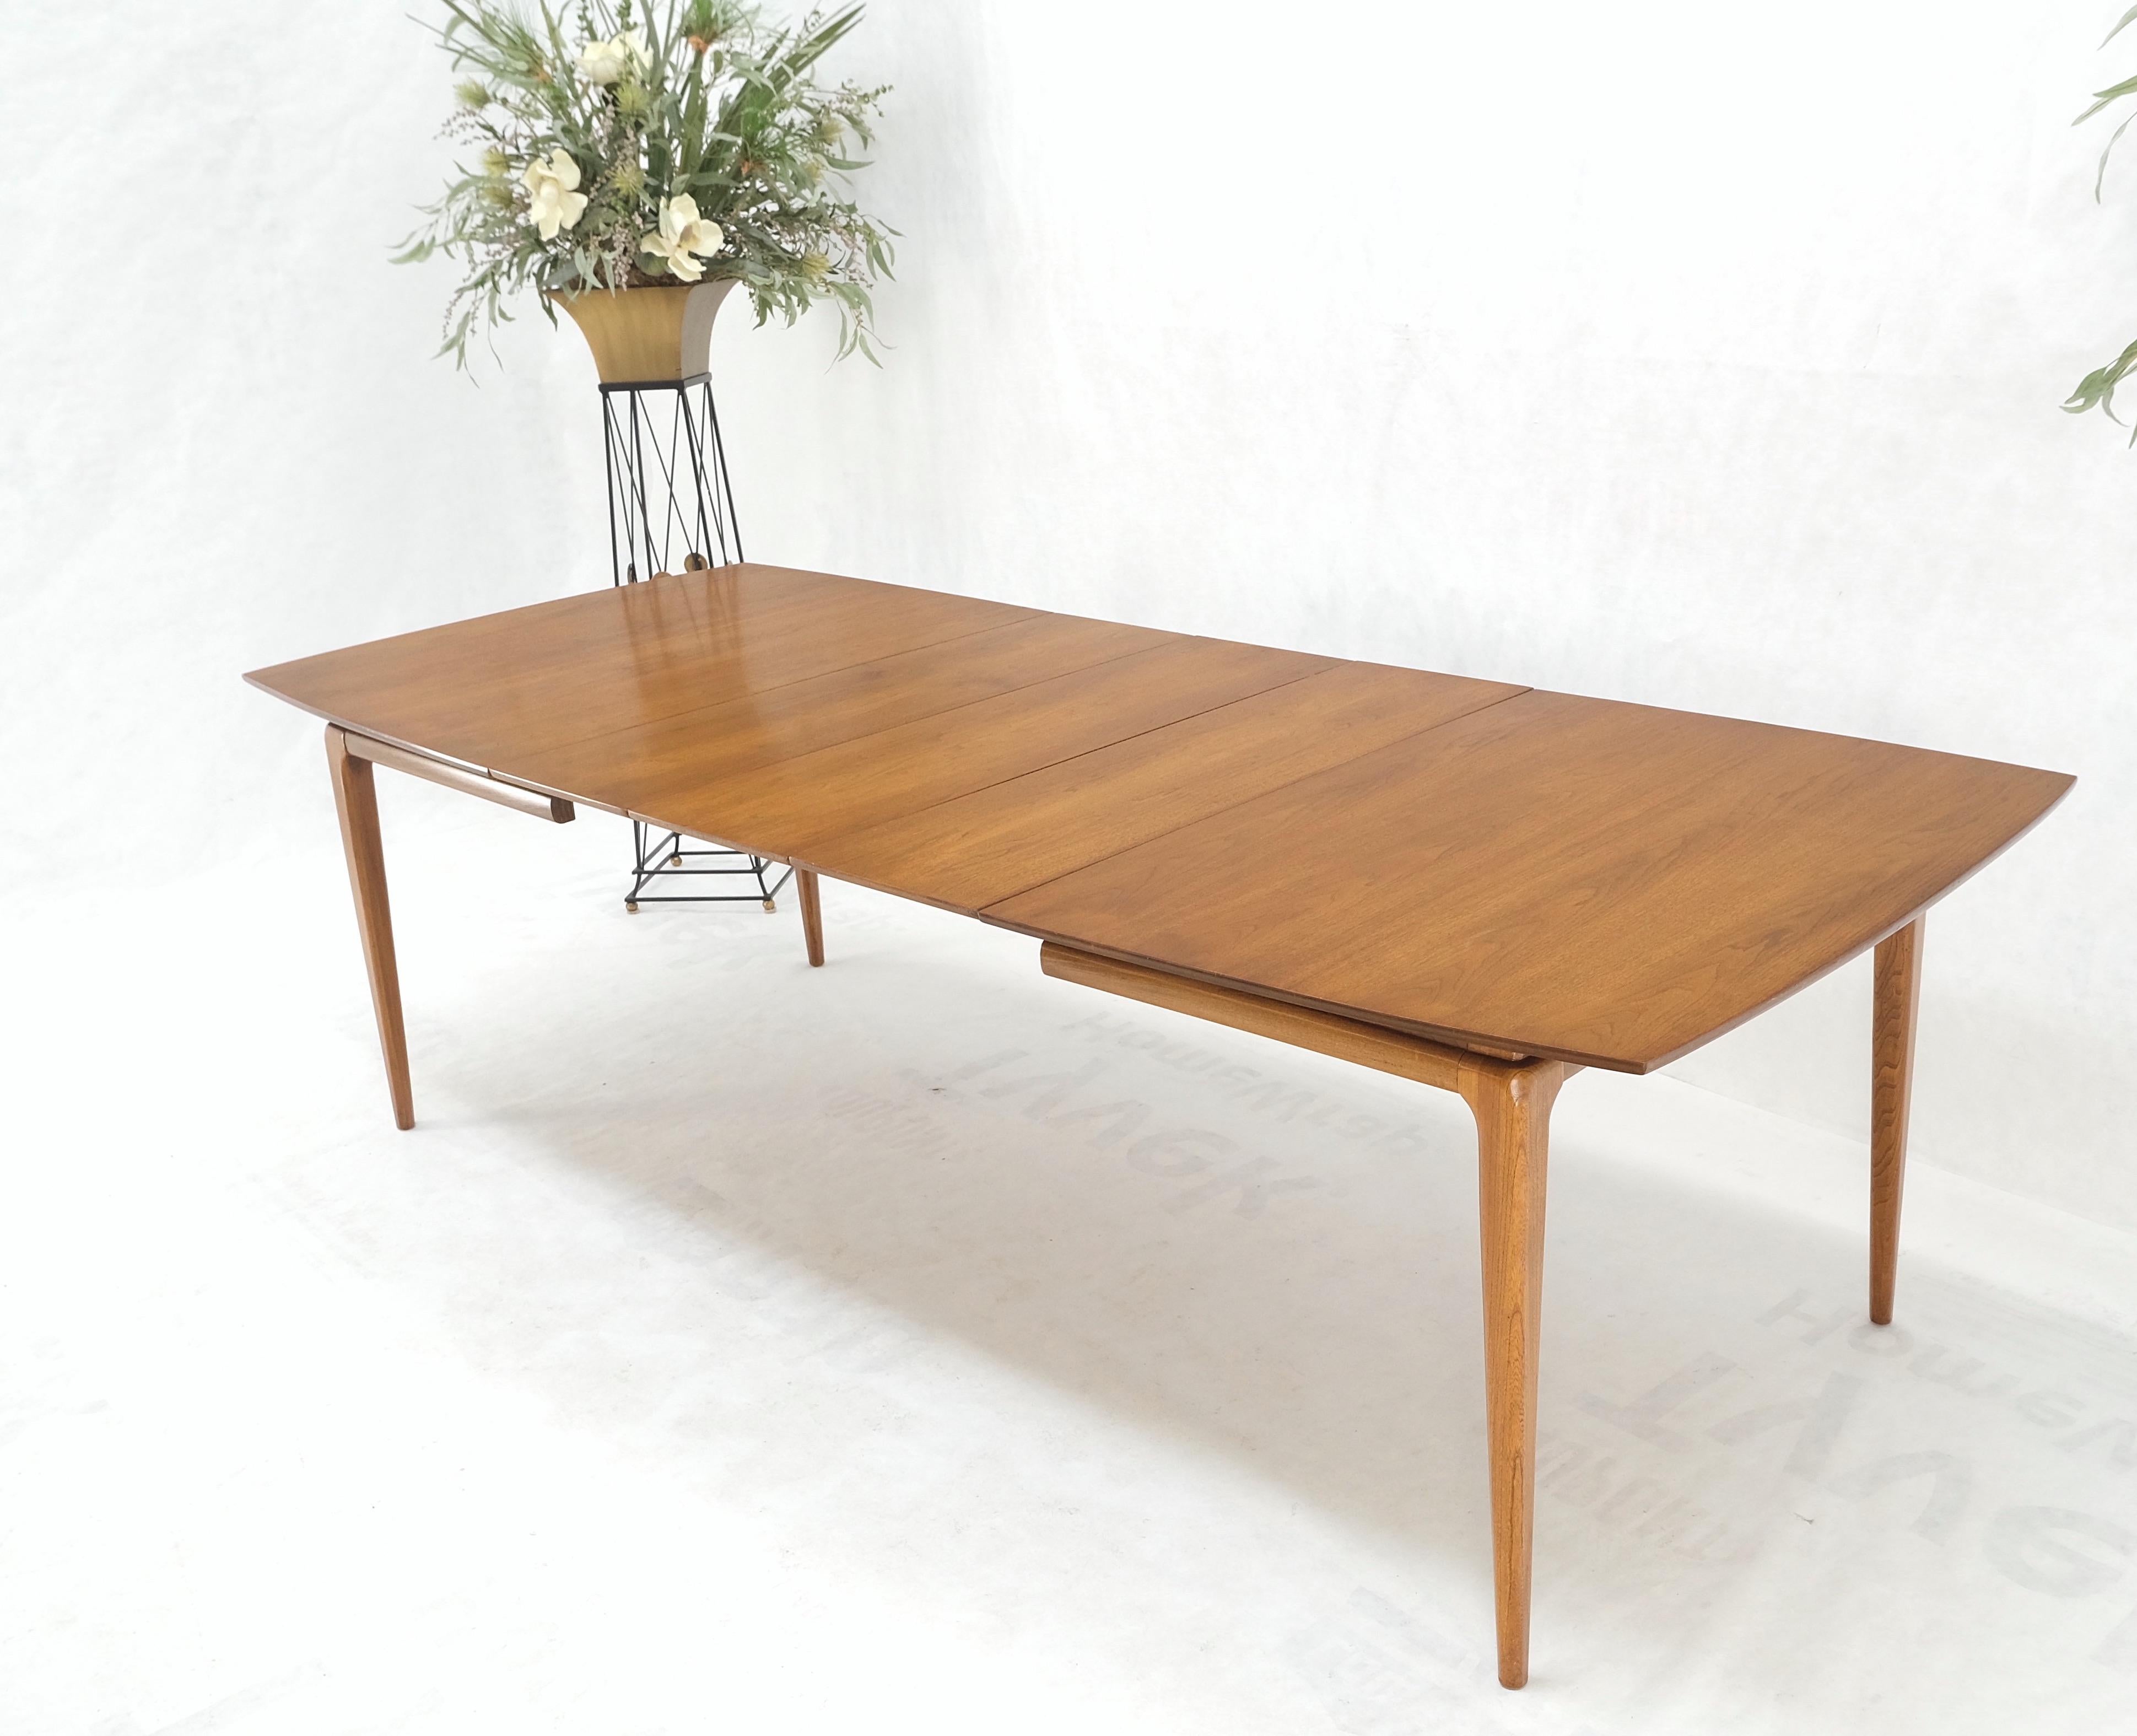 Light Walnut American Mid-Century Modern Boat Shape Dining Table 3 Leaves Mint! For Sale 1